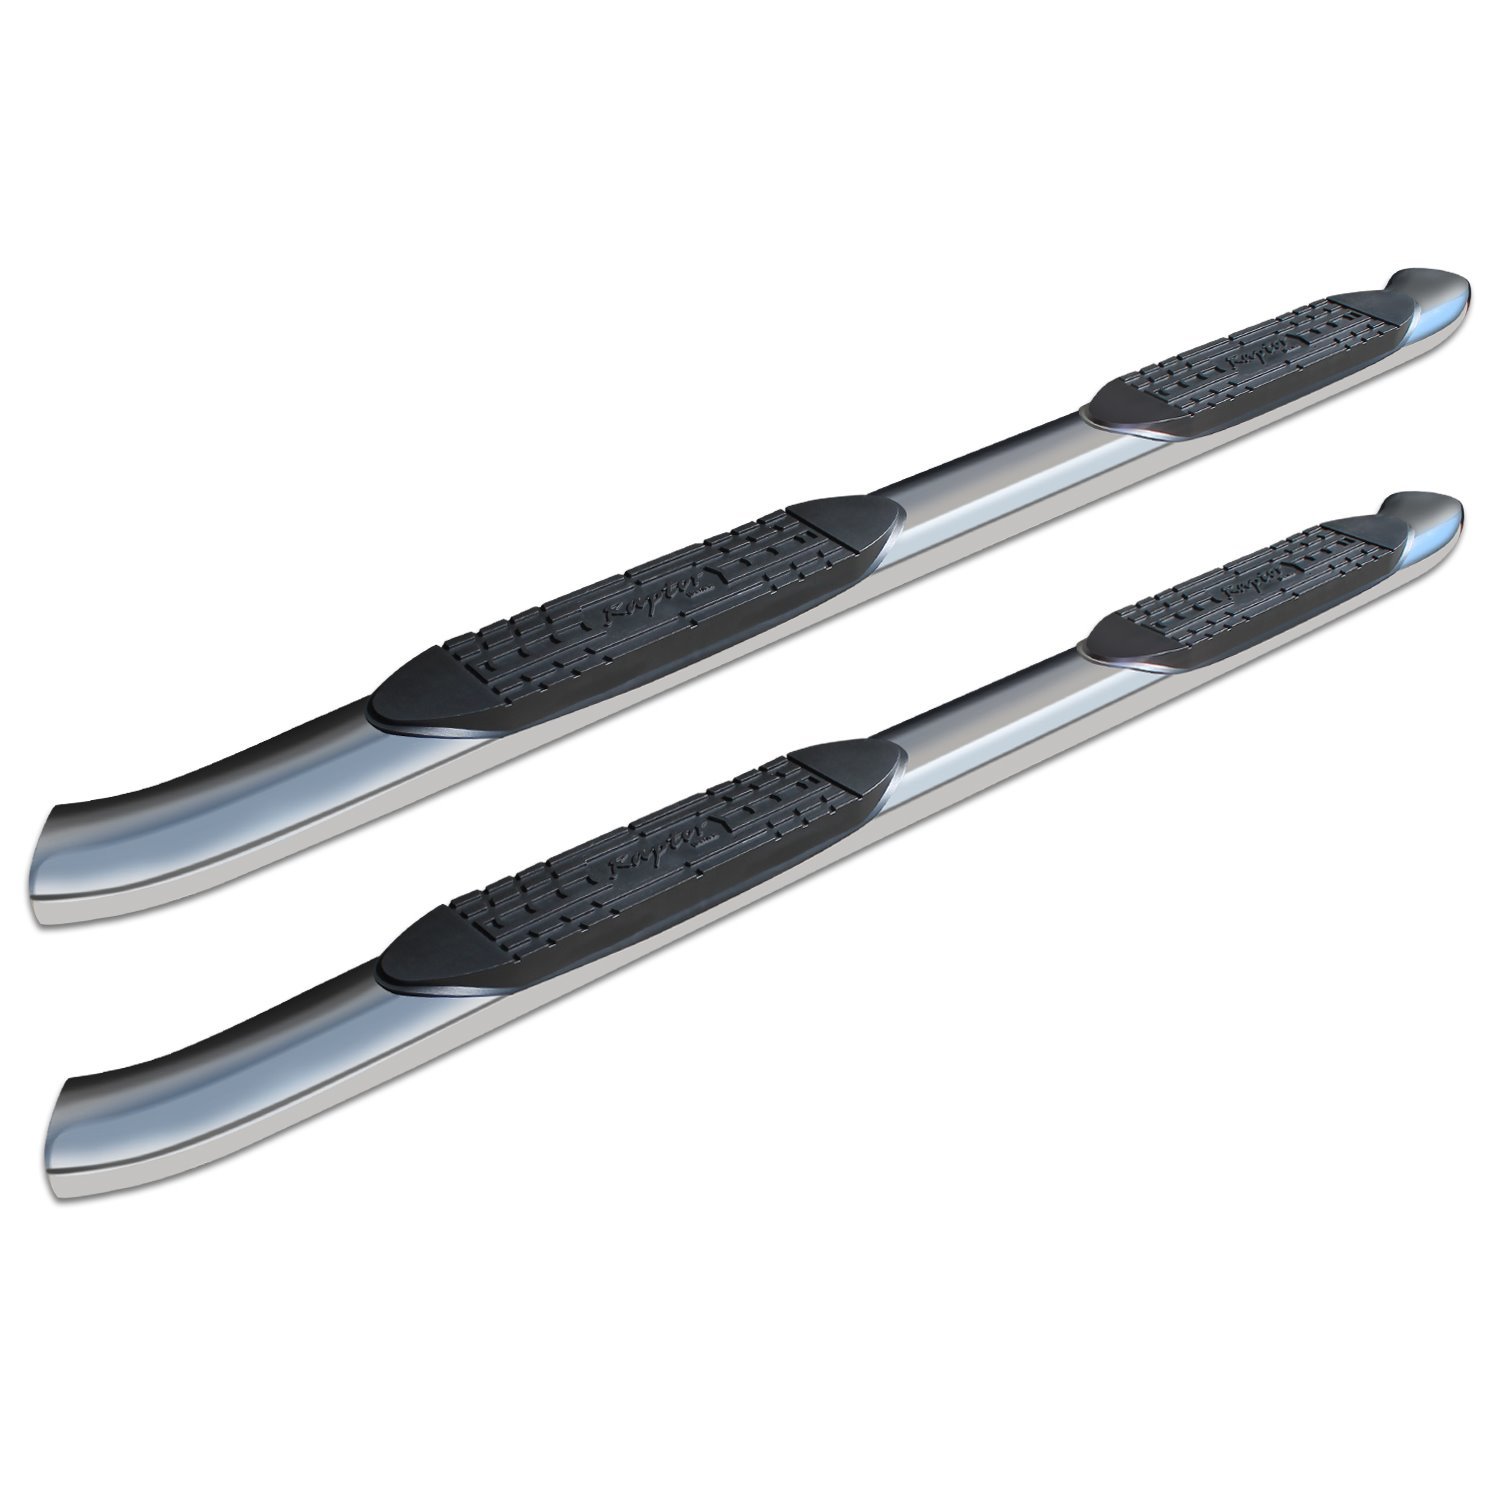 1601-0433 5 in OE Style Curved Oval Steps, Polished Steel, Fits Select Silverado/Sierra 1500/2500/3500